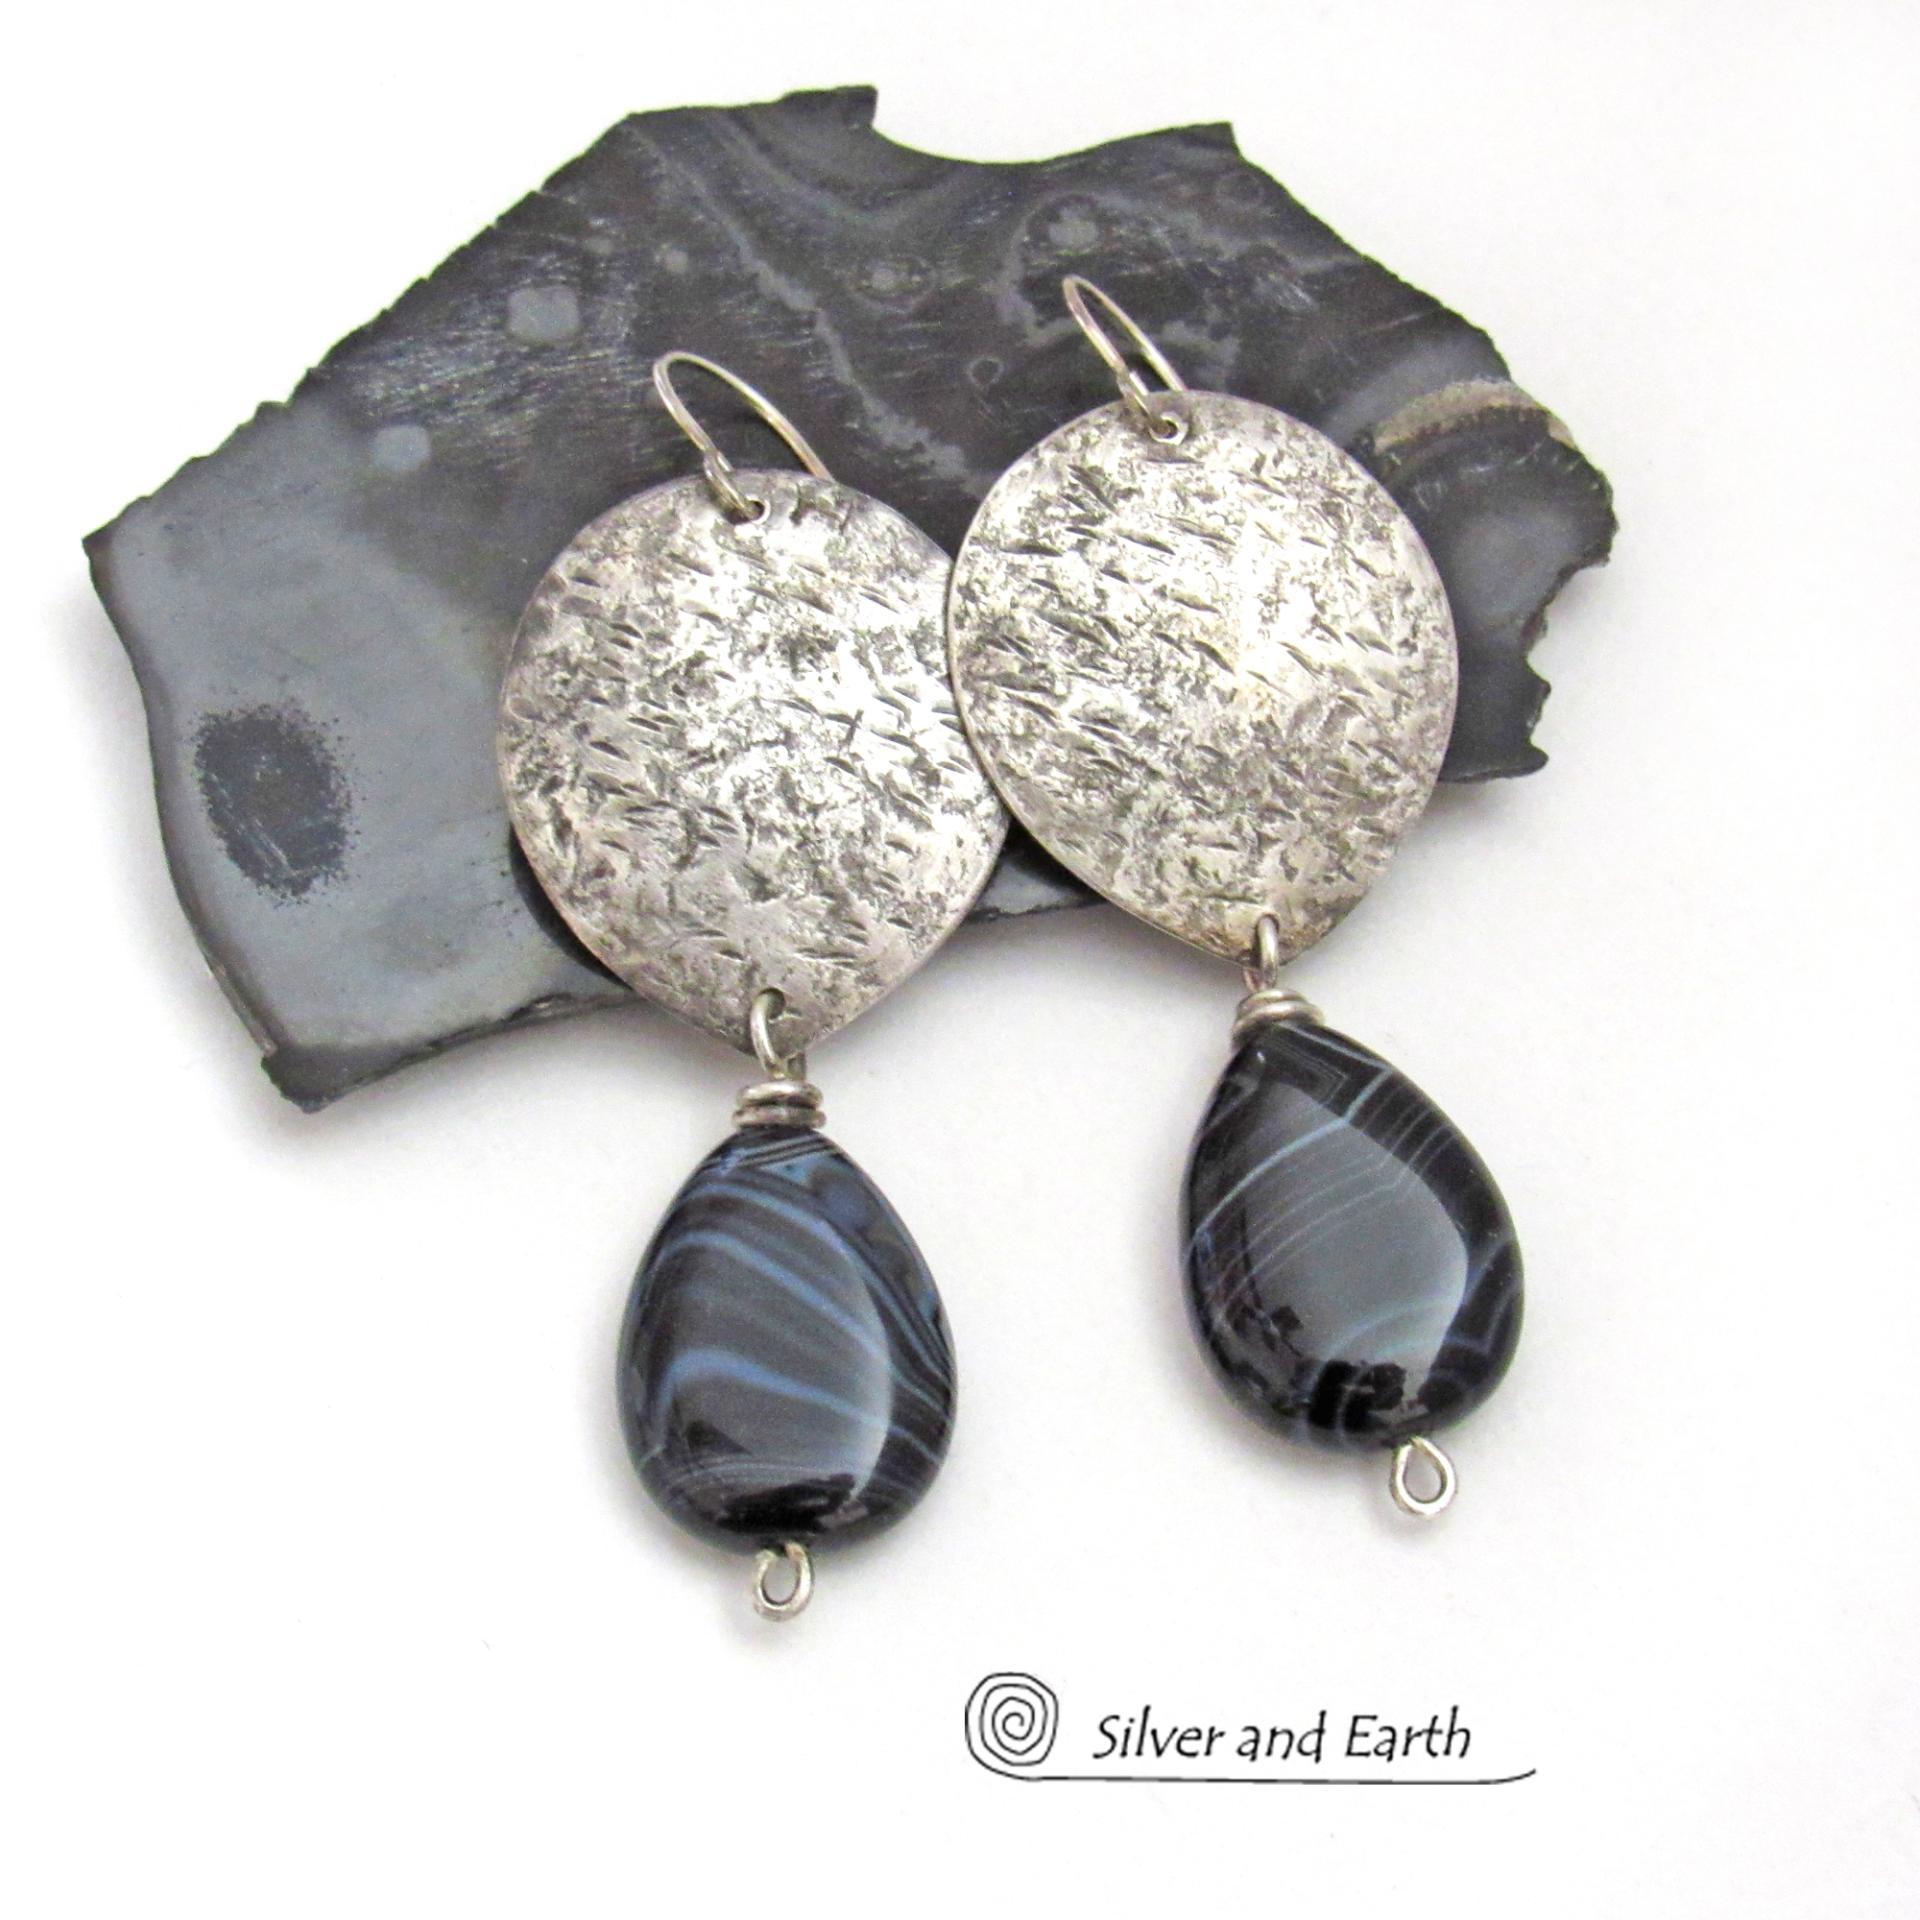 Textured Sterling Silver Earrings with Black Banded Agate Gemstones